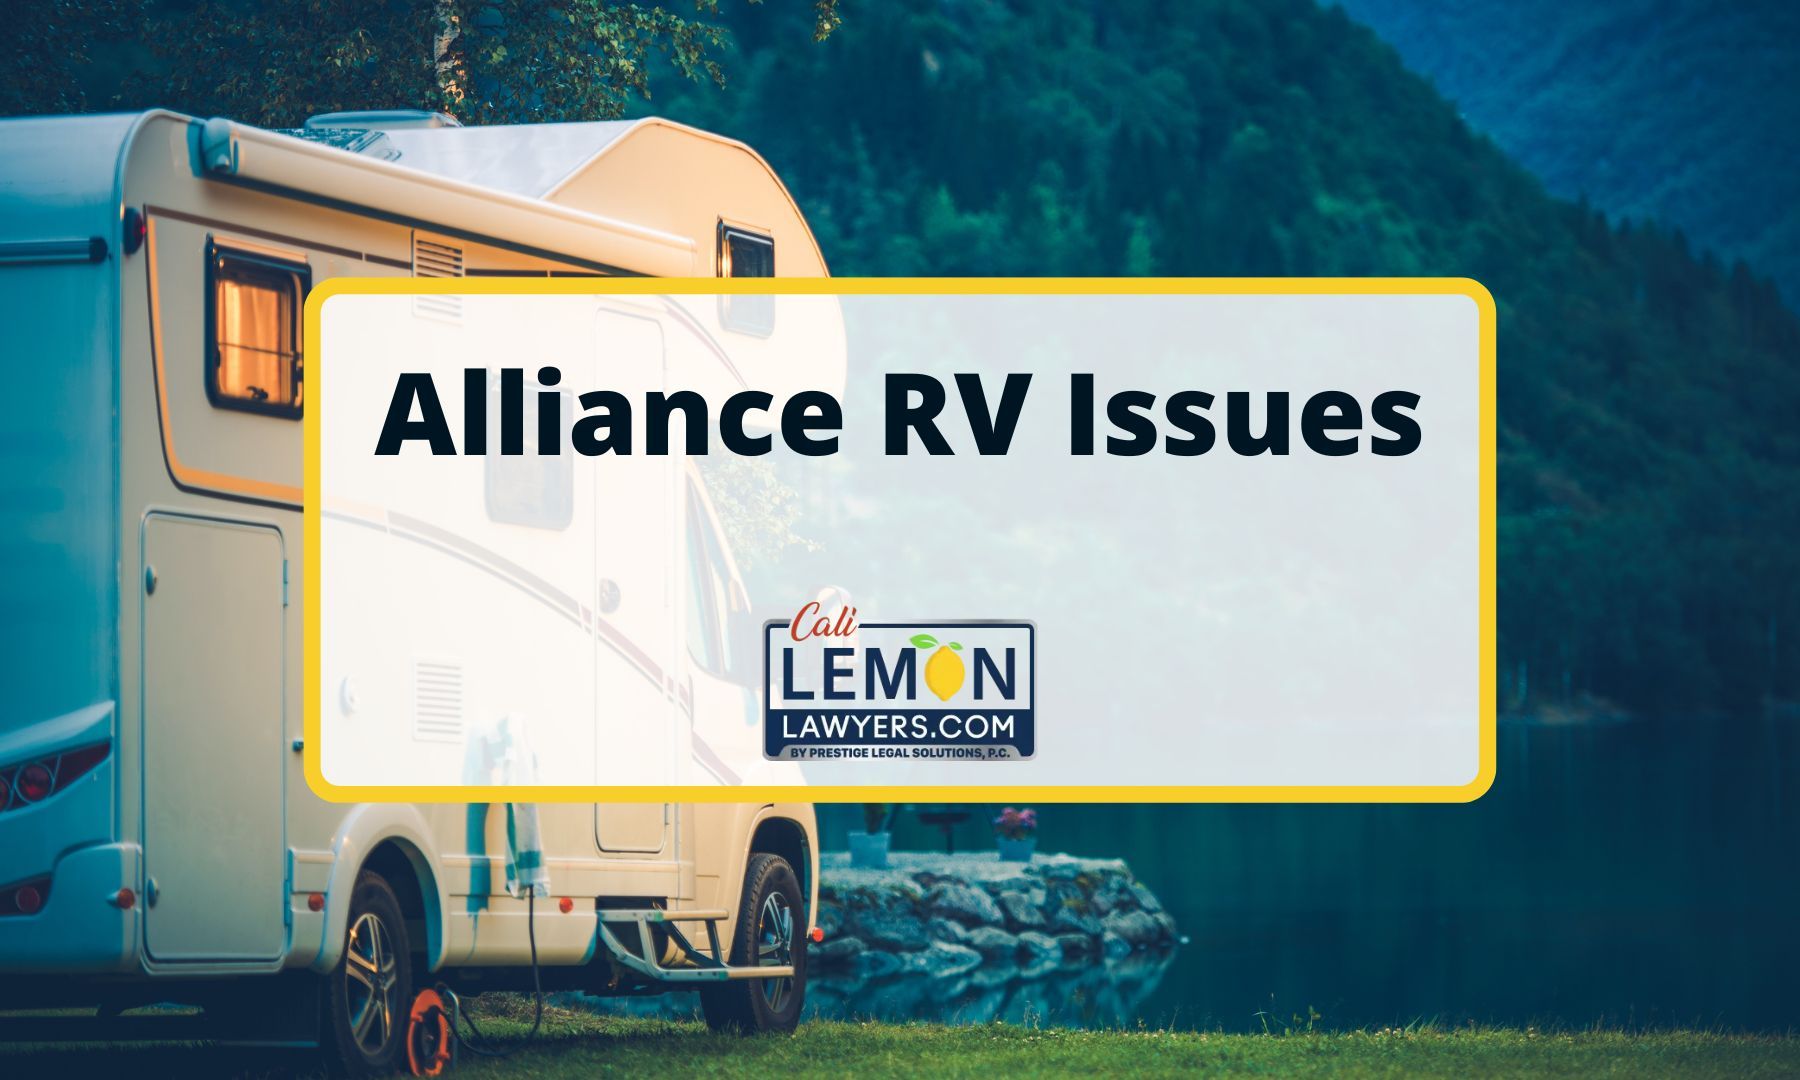 Alliance RV Issues